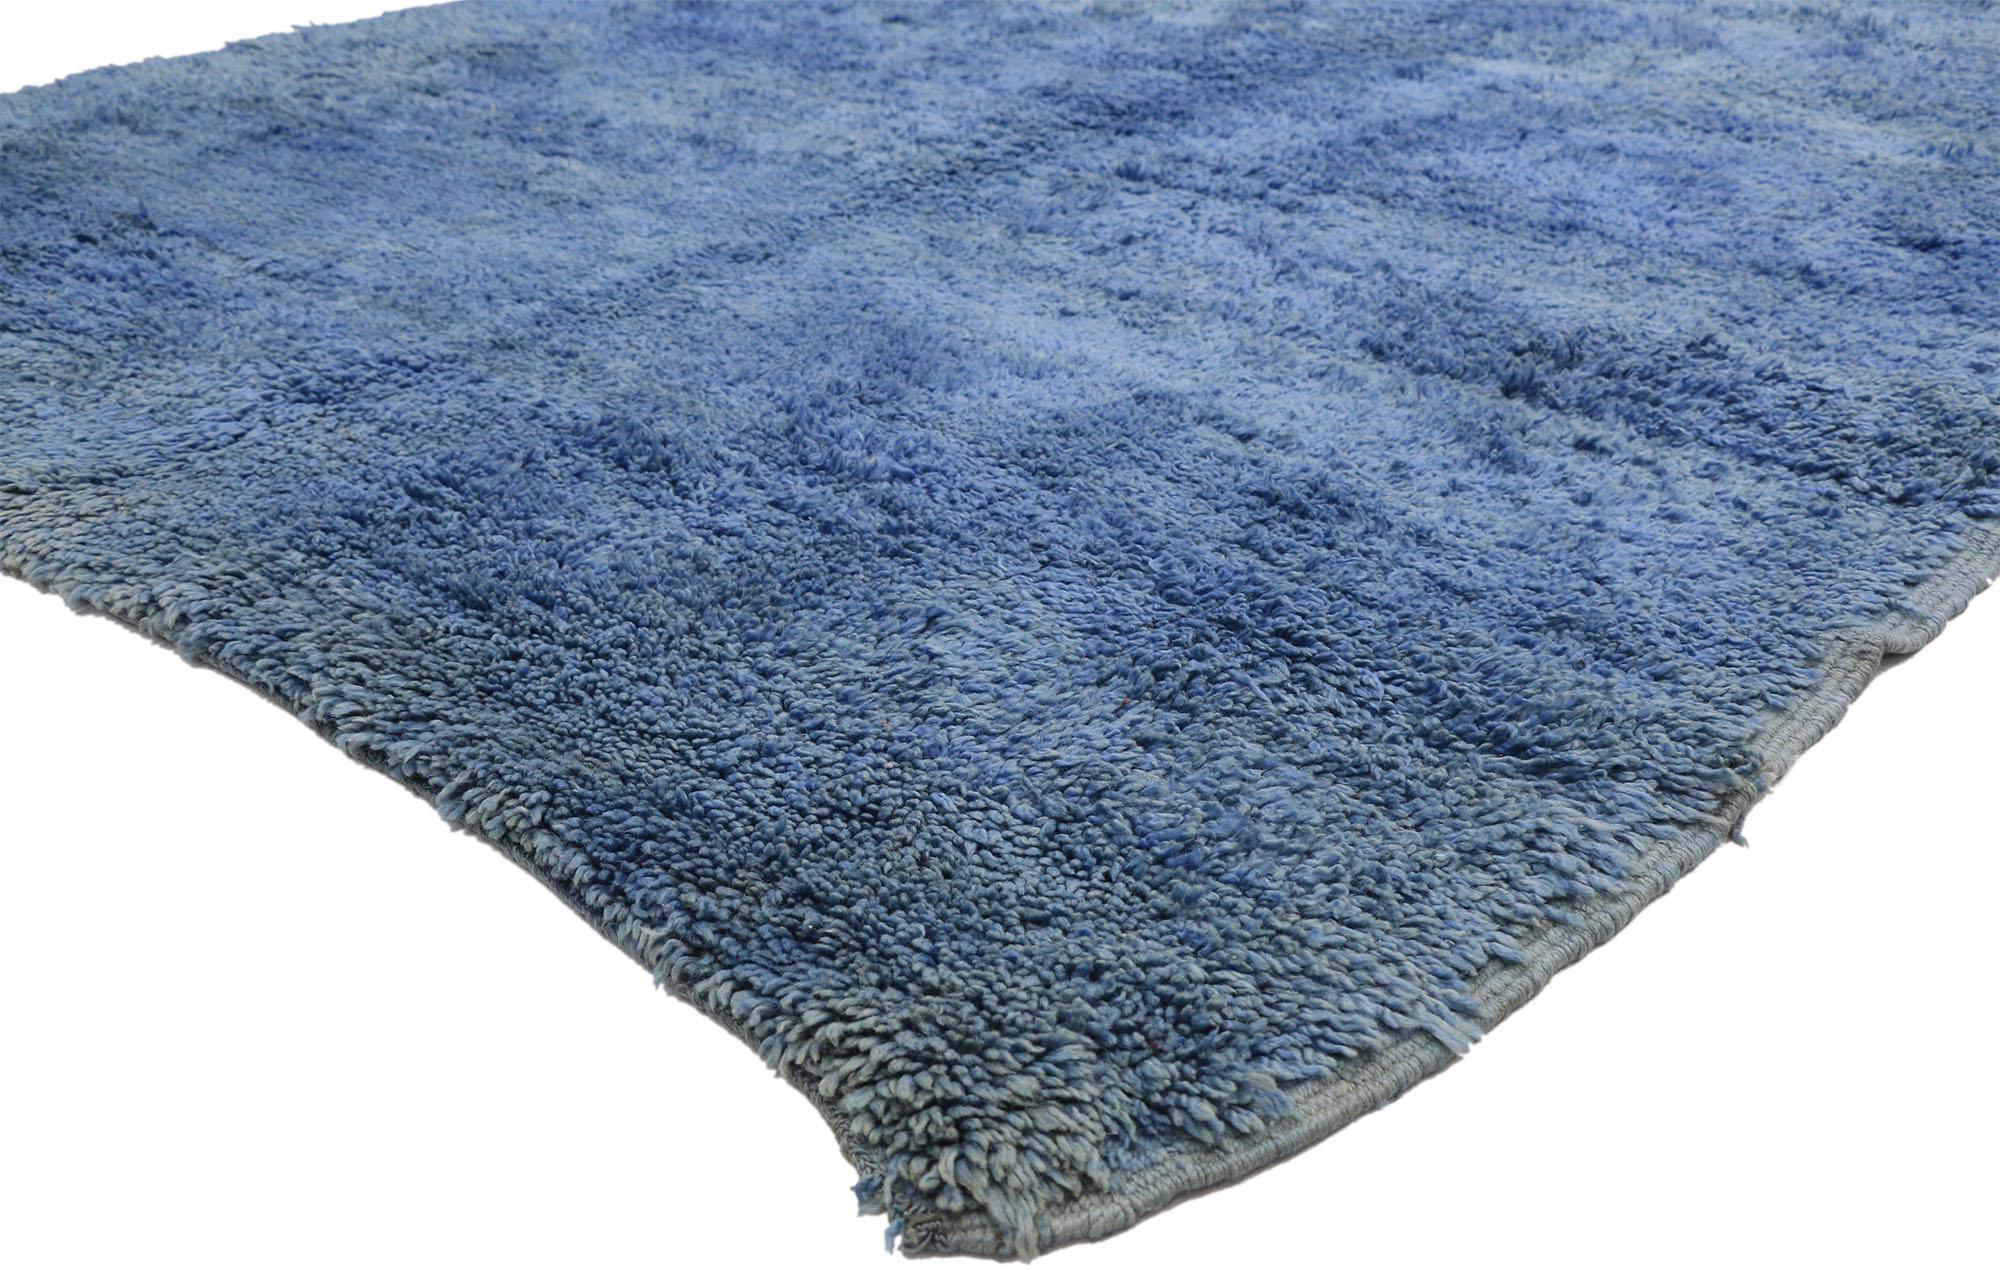 20854, blue indigo vintage Berber Moroccan rug with Postmodern Memphis style. Bold indigo blue combined with plush wool pile creates an endlessly fascinating effect in this hand knotted wool vintage Berber Moroccan rug. A solid indigo plane features